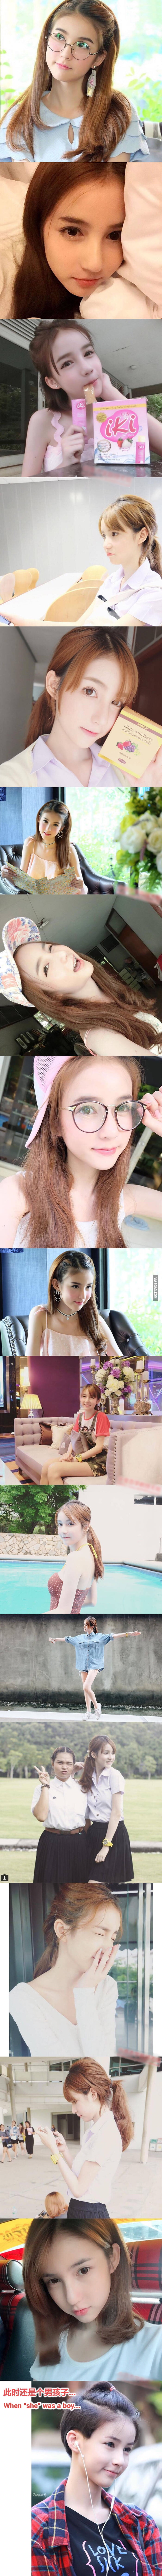 She is from Thailand, yes, she is a he.